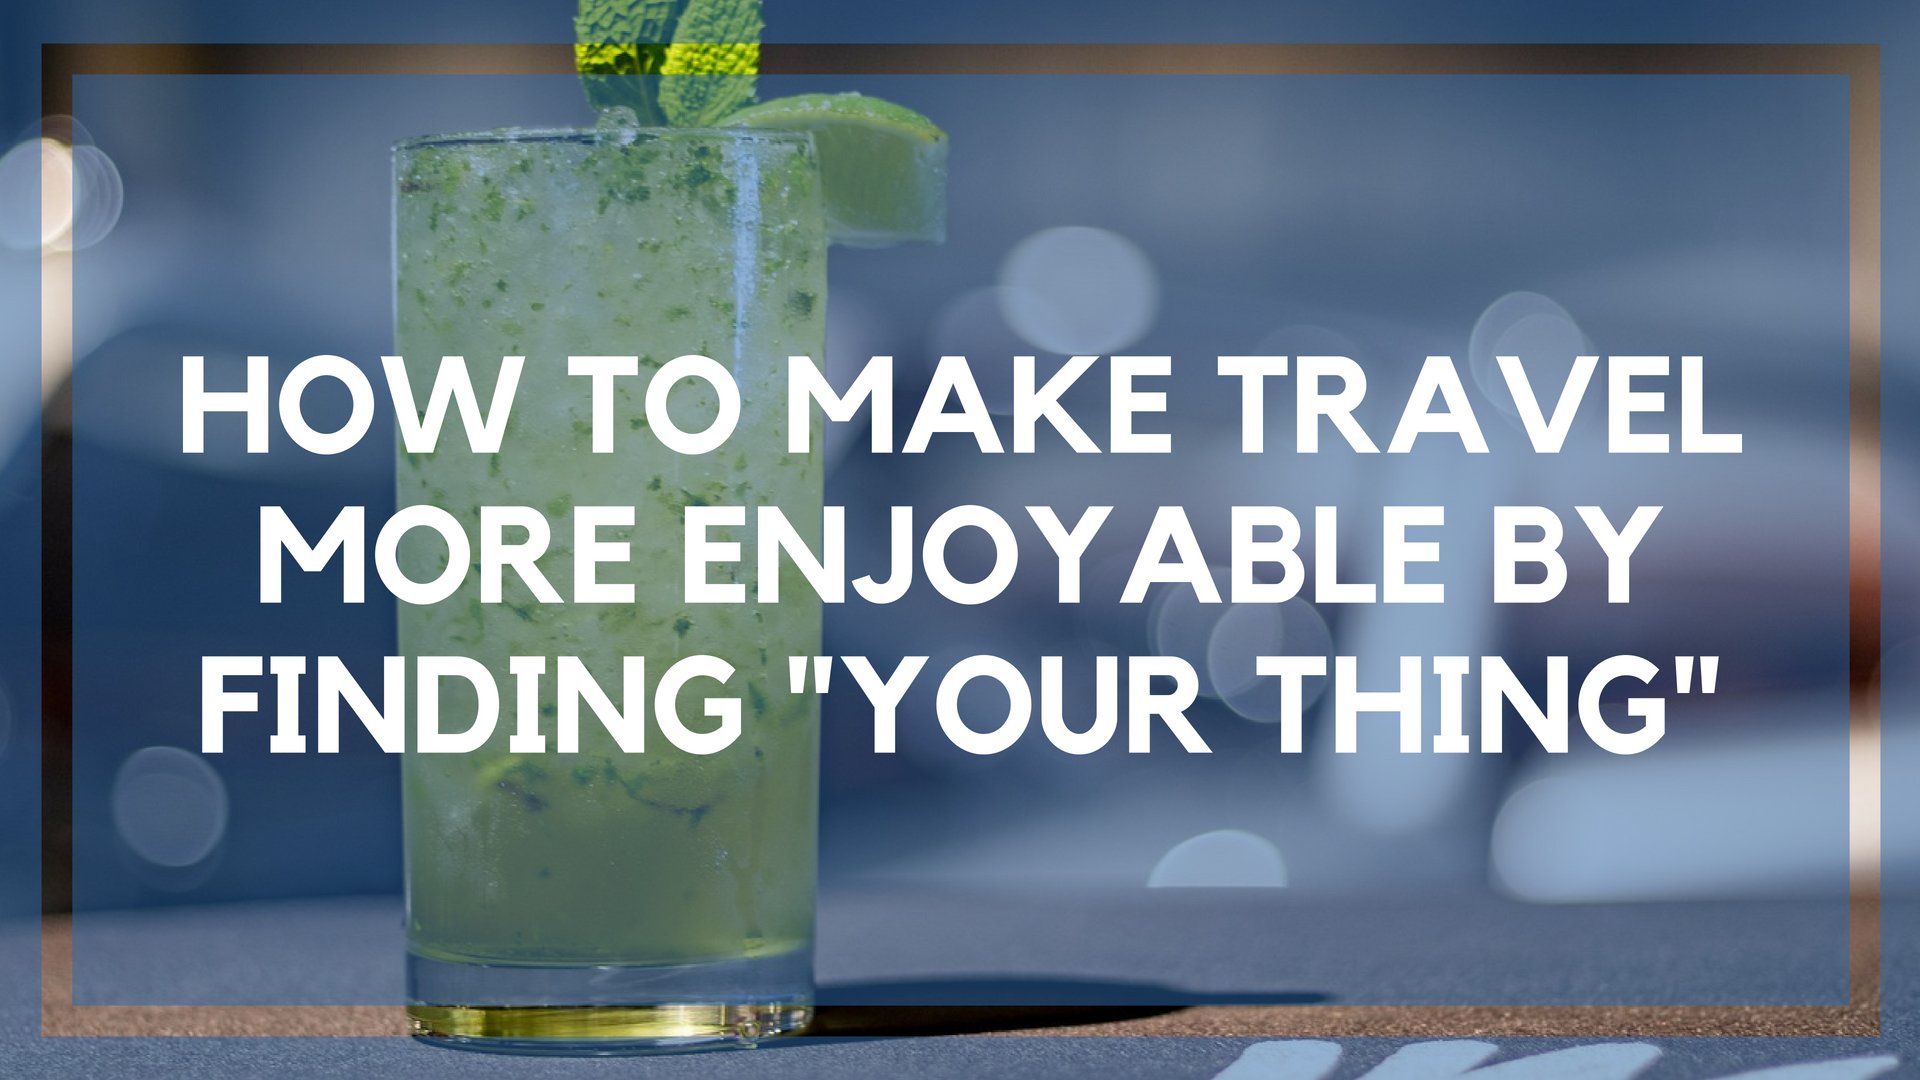 How to Make Travel More Enjoyable by Finding “Your Thing”